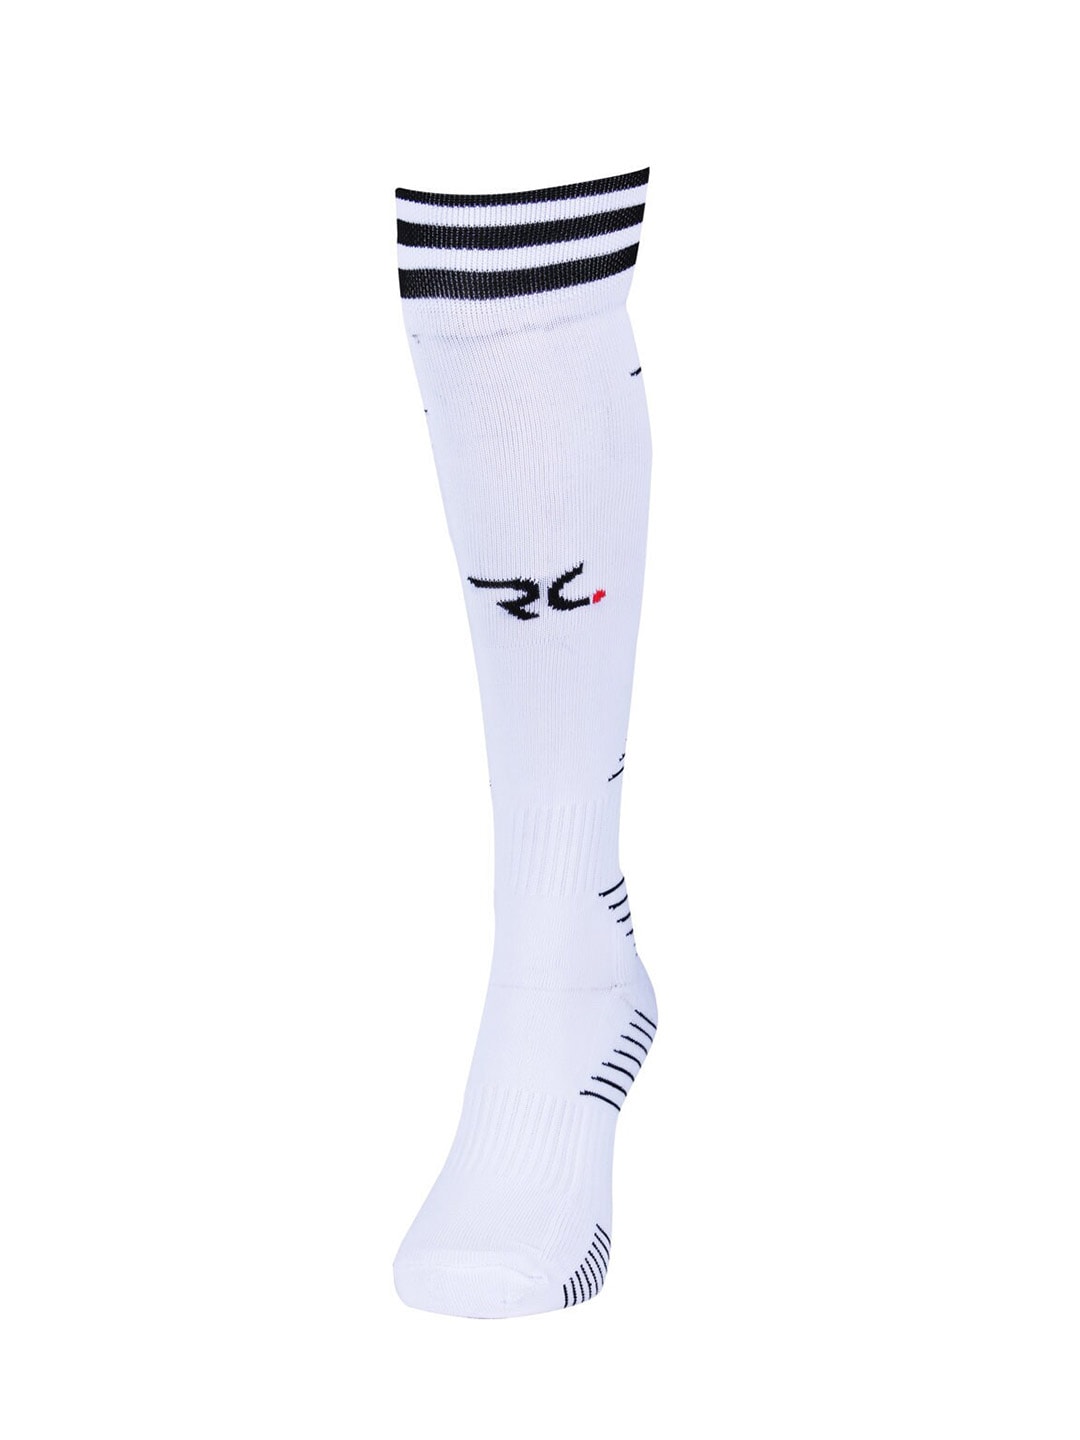 RC. ROYAL CLASS Unisex White Football Knee High Cushioned Socks Price in India